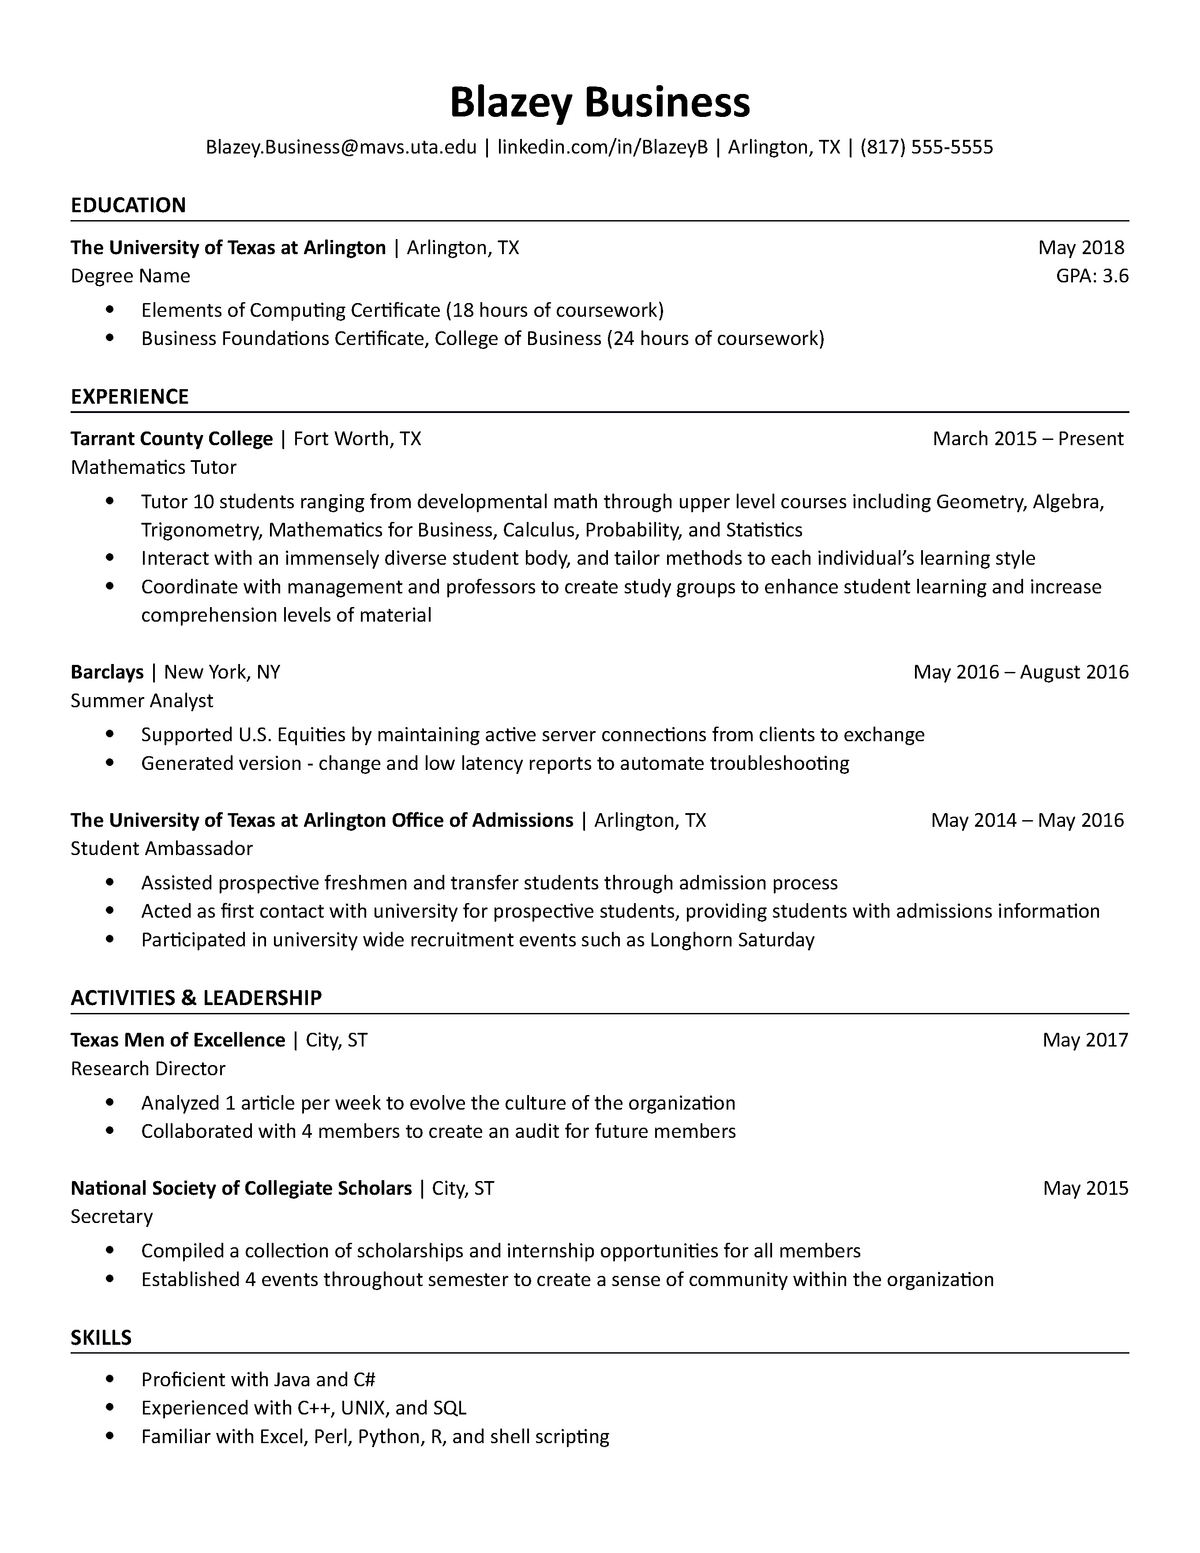 help with resume writing in arlington